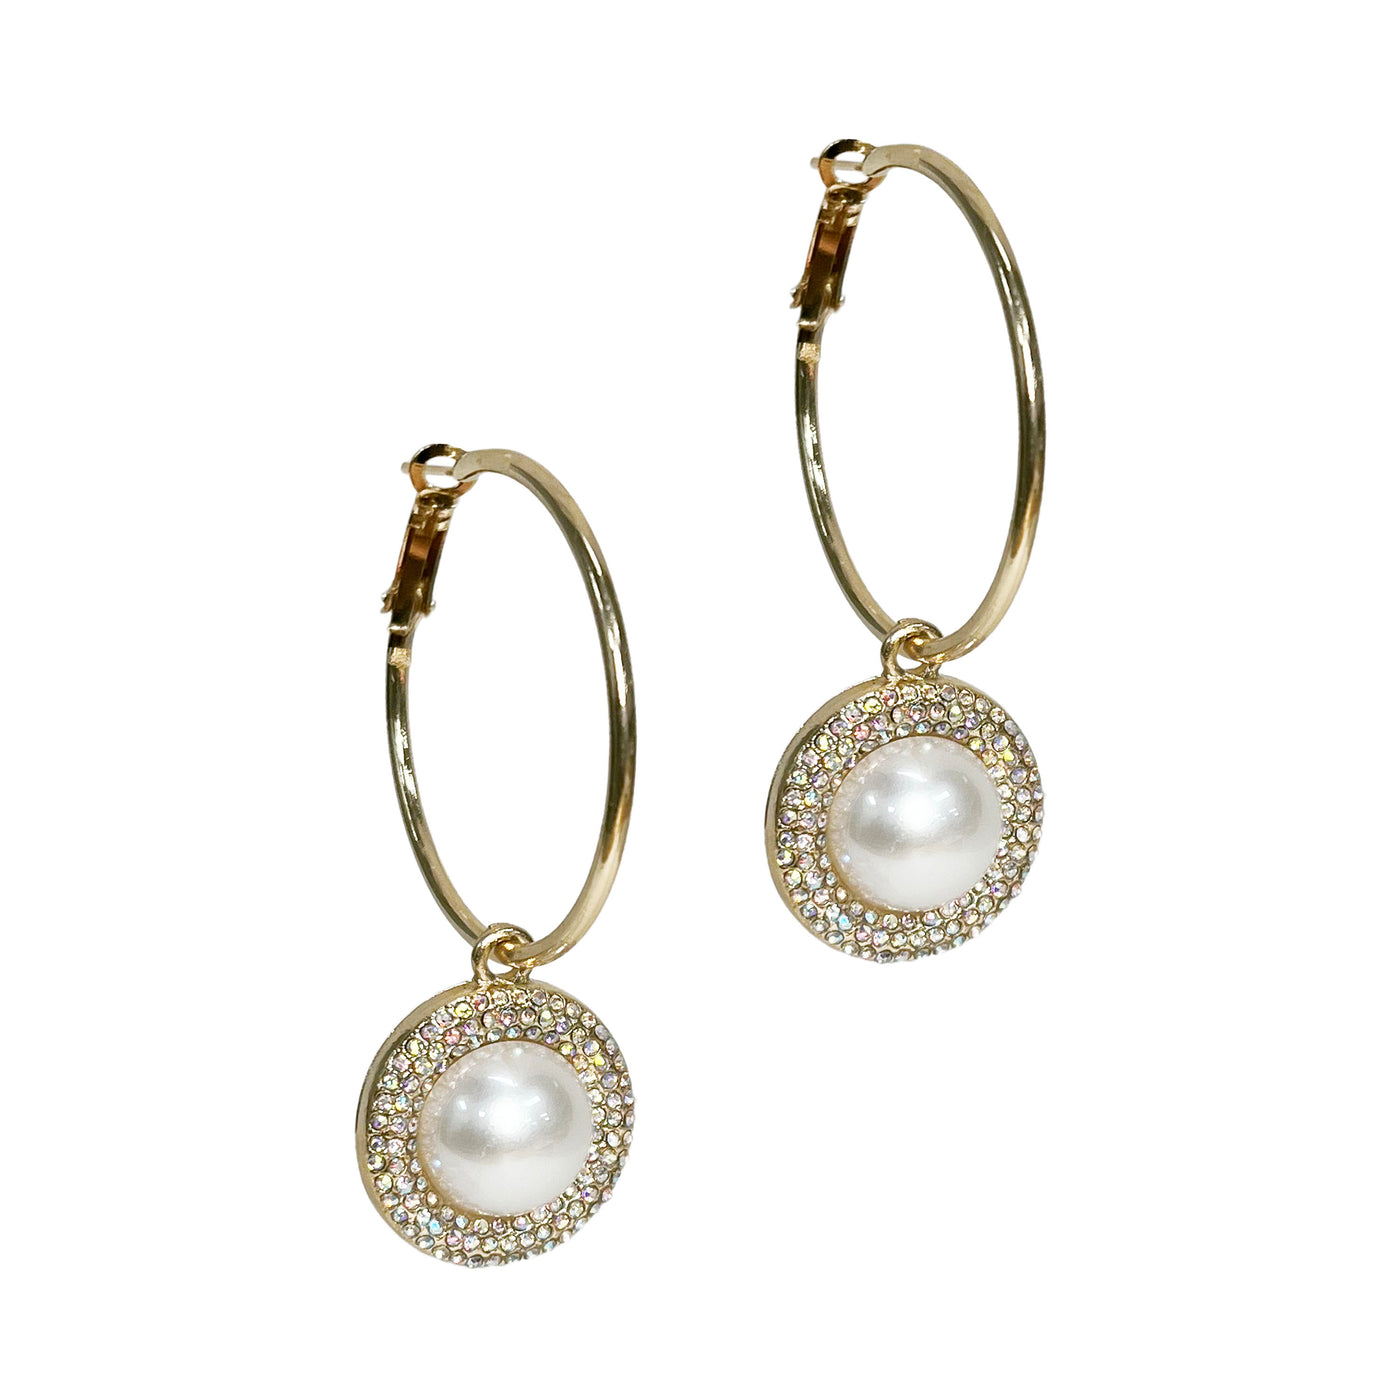 Gold Hoops with Pearl Drop